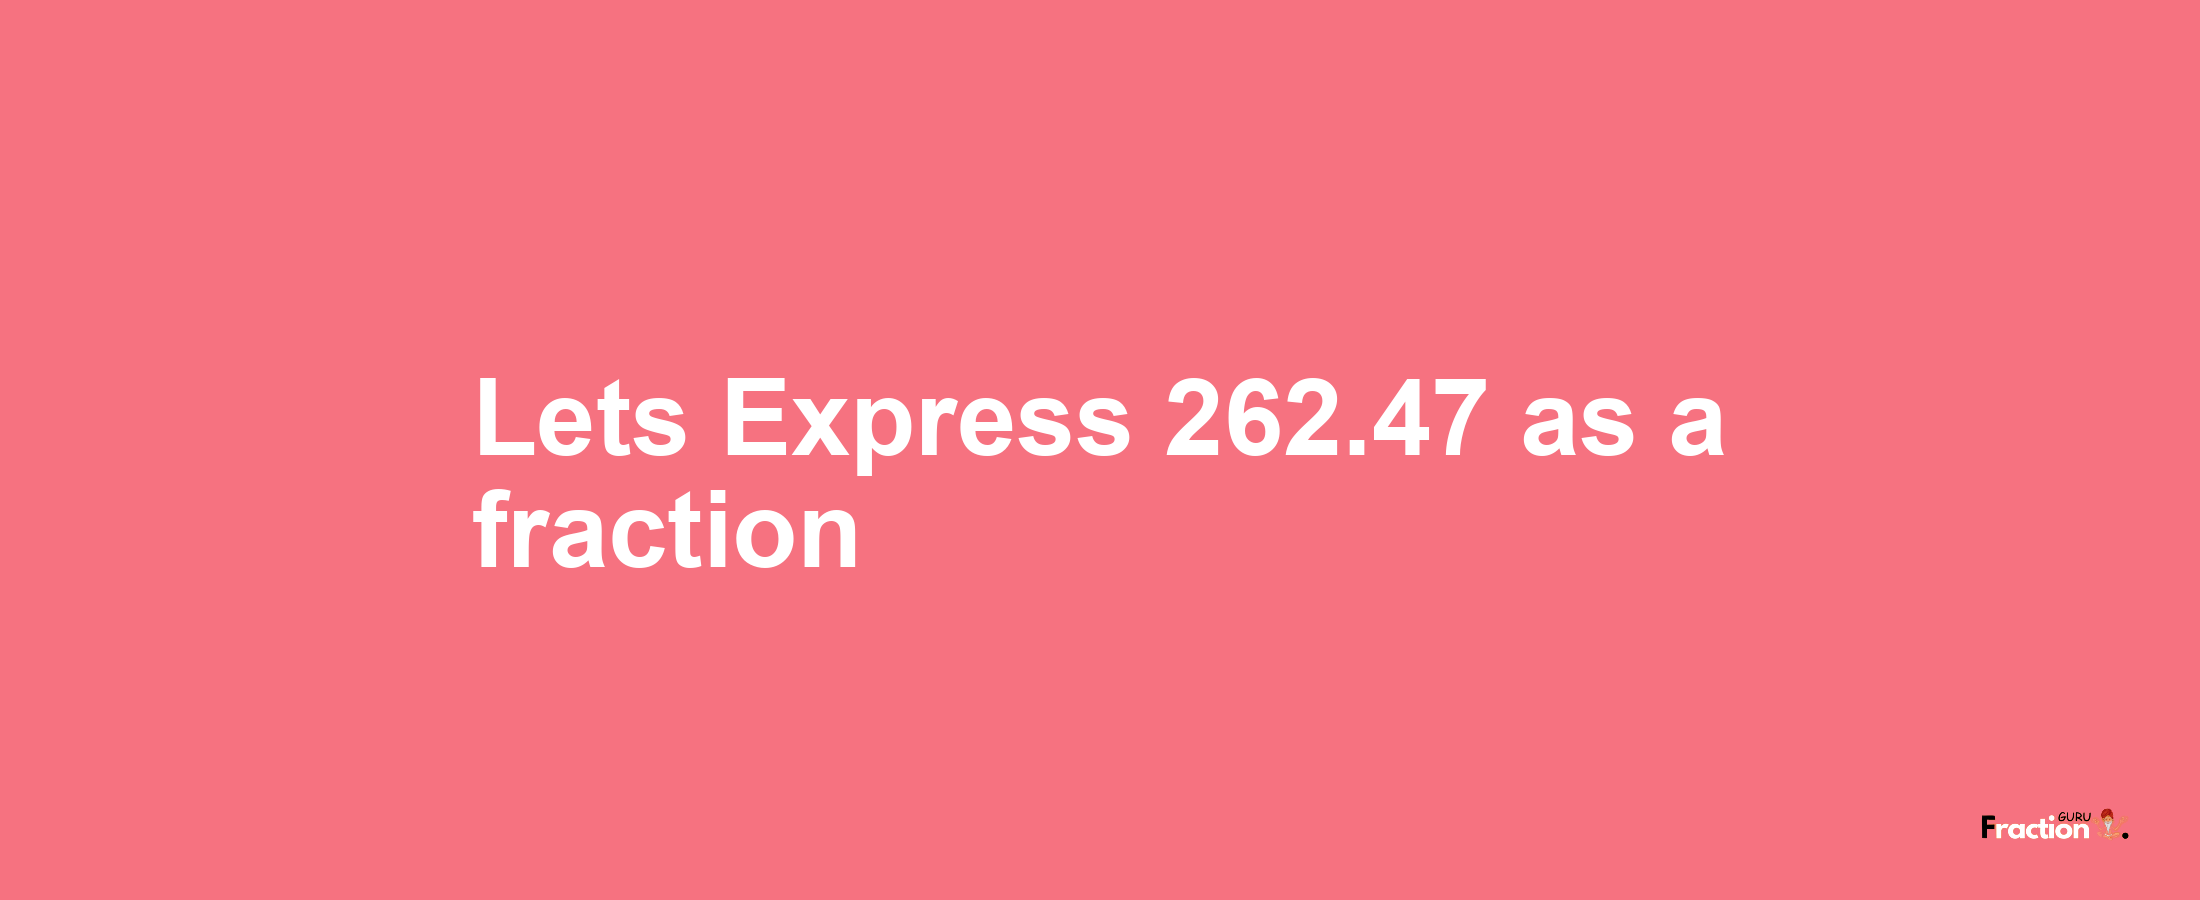 Lets Express 262.47 as afraction